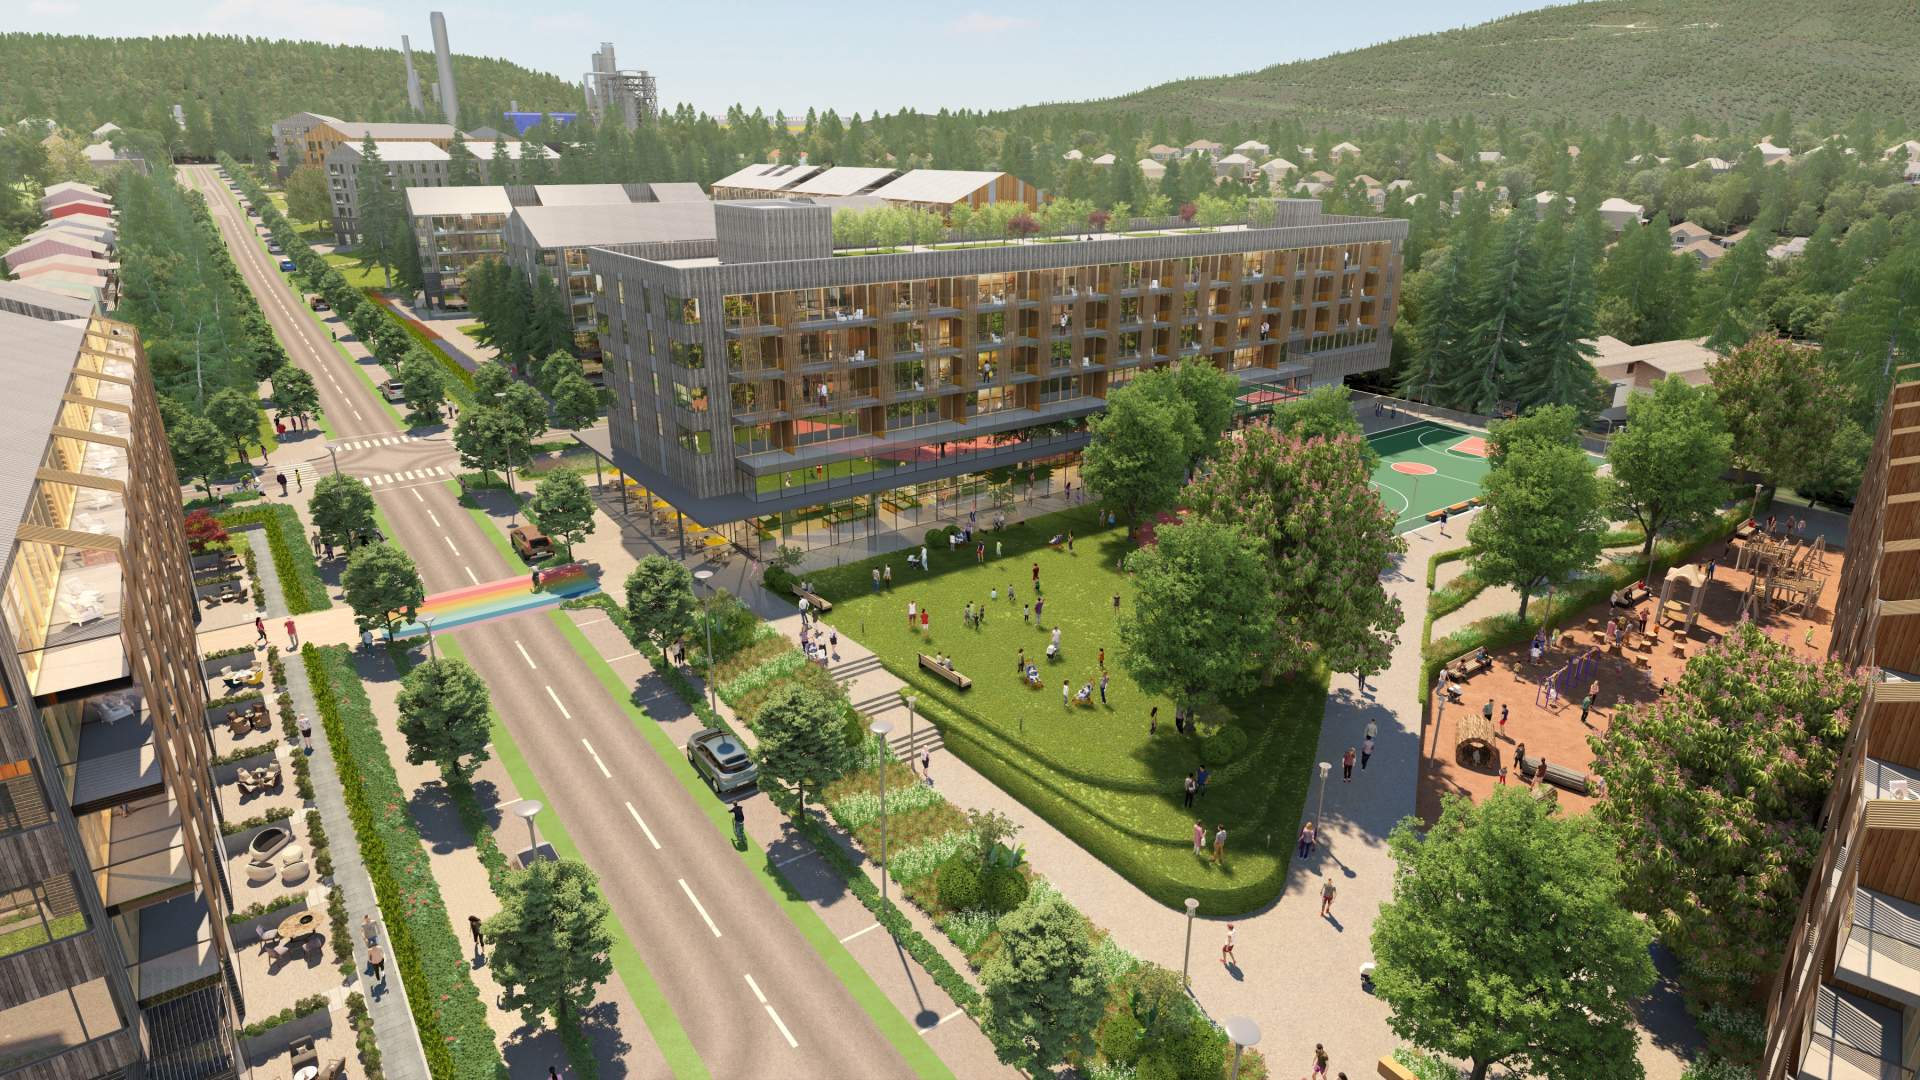 A 23.4-acre mixed-use, master-planned community in Port Moody's Seaview neighbourhood.